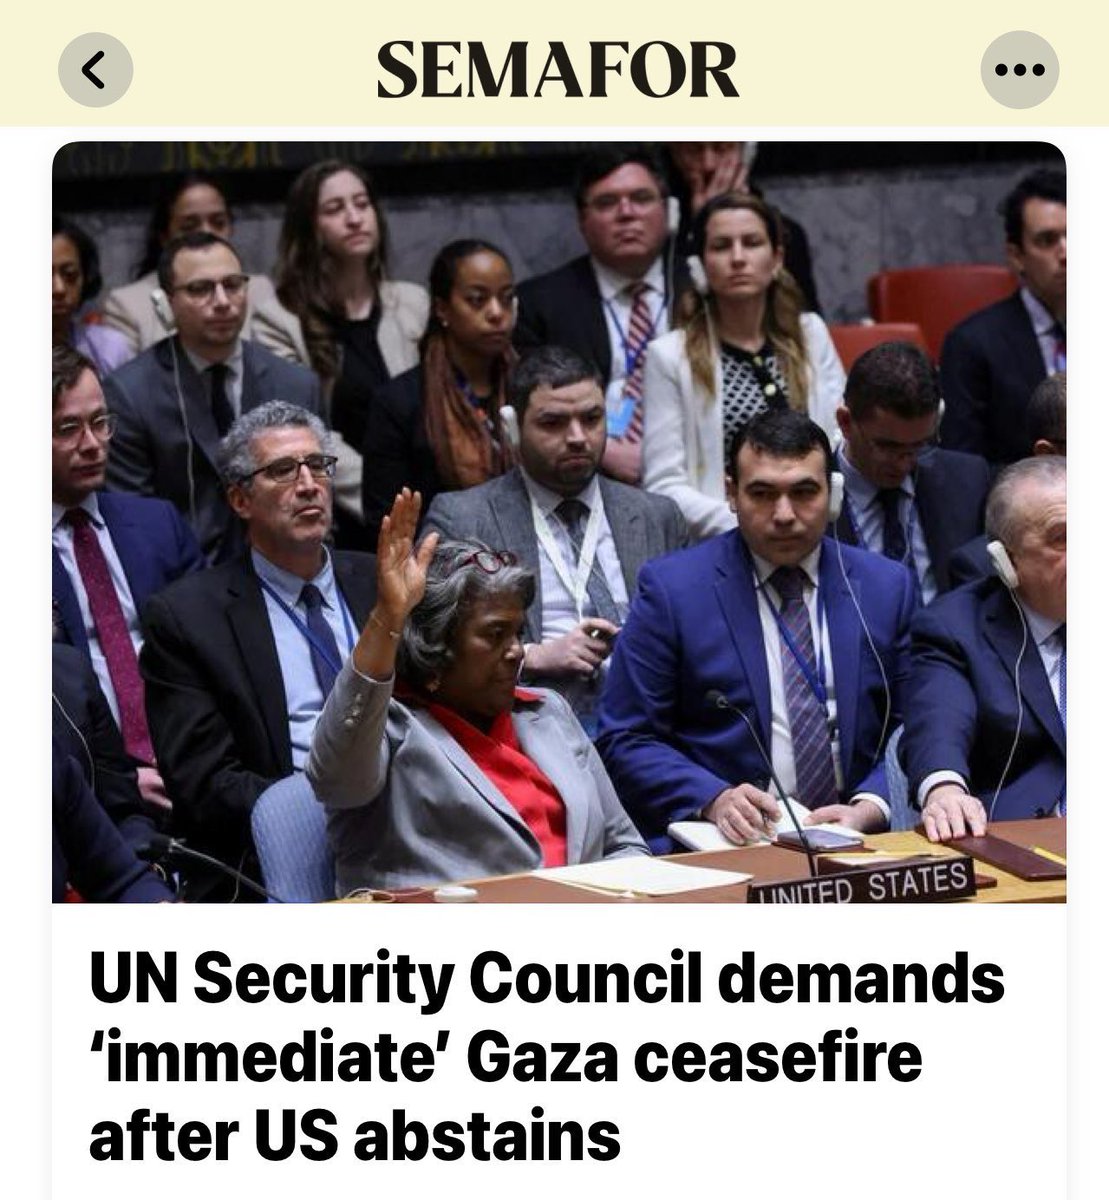 It’s appalling the U.S. allowed passage of a resolution that fails to condemn Hamas. The UN has always been unwilling to condemn this group of terrorists, cowards and rapists. We must stand with Israel and stop pandering to the political fringe or Hamas apologists.